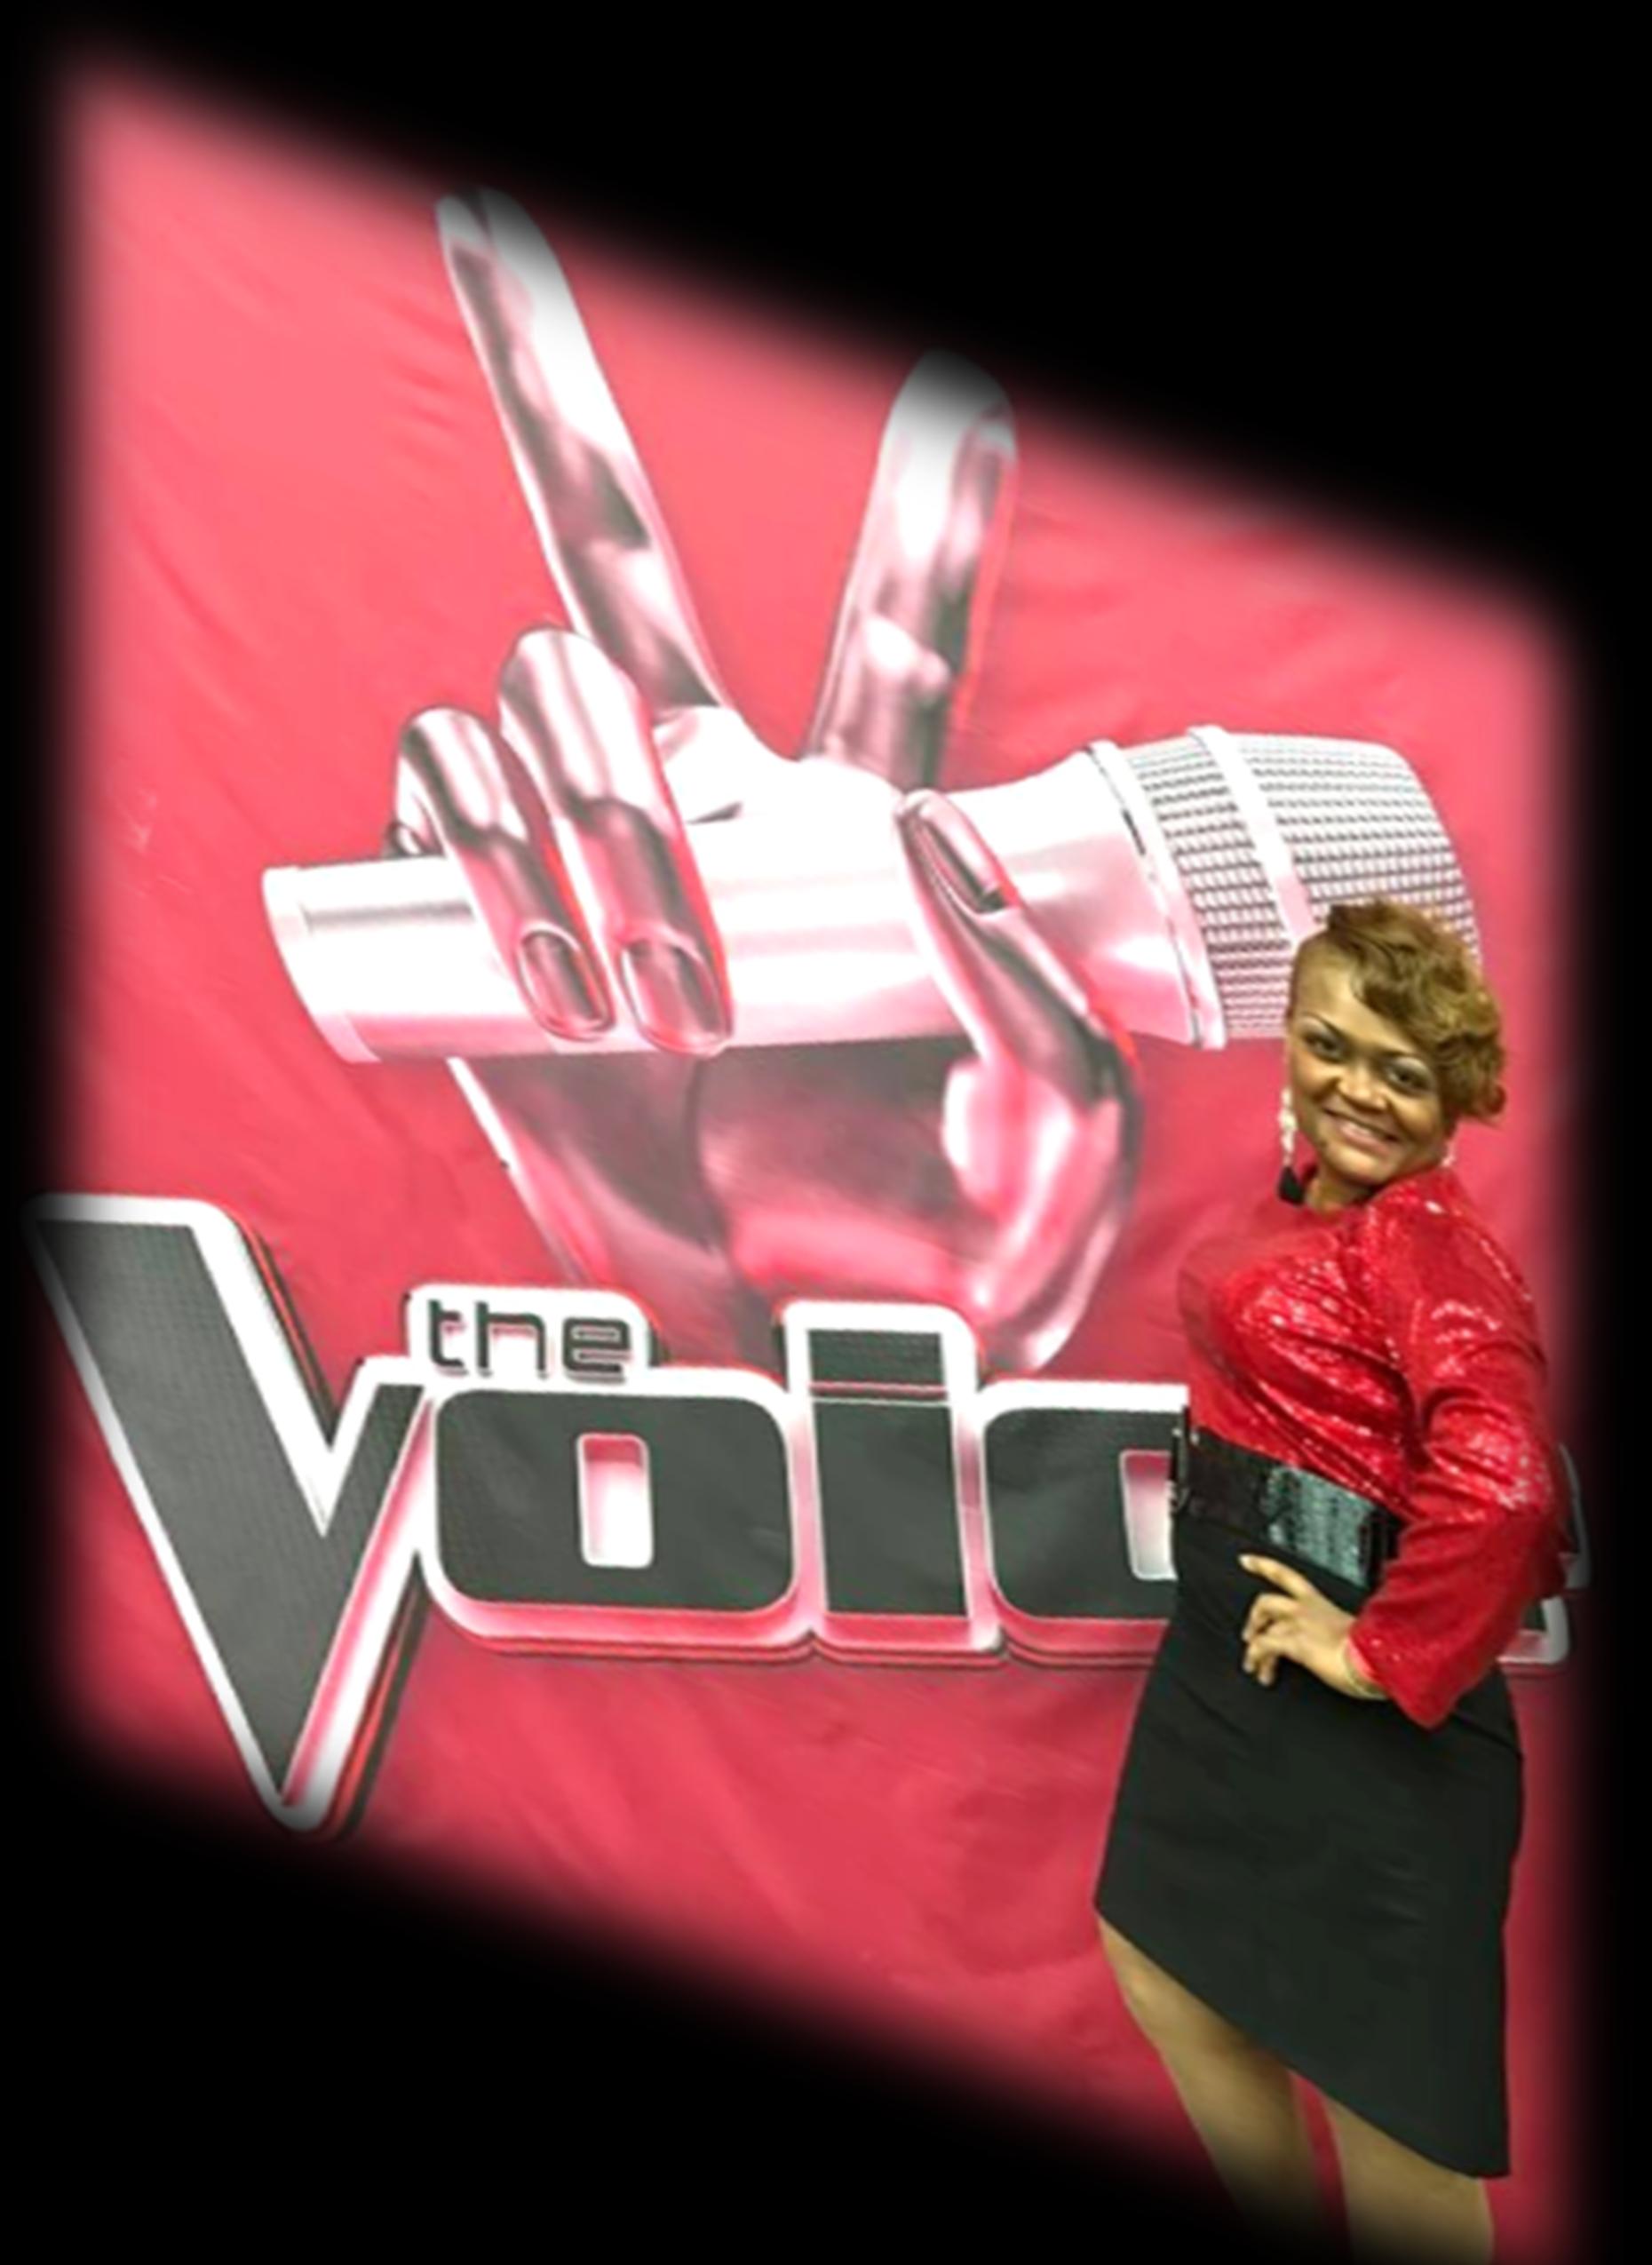 Auditioning for The Voice